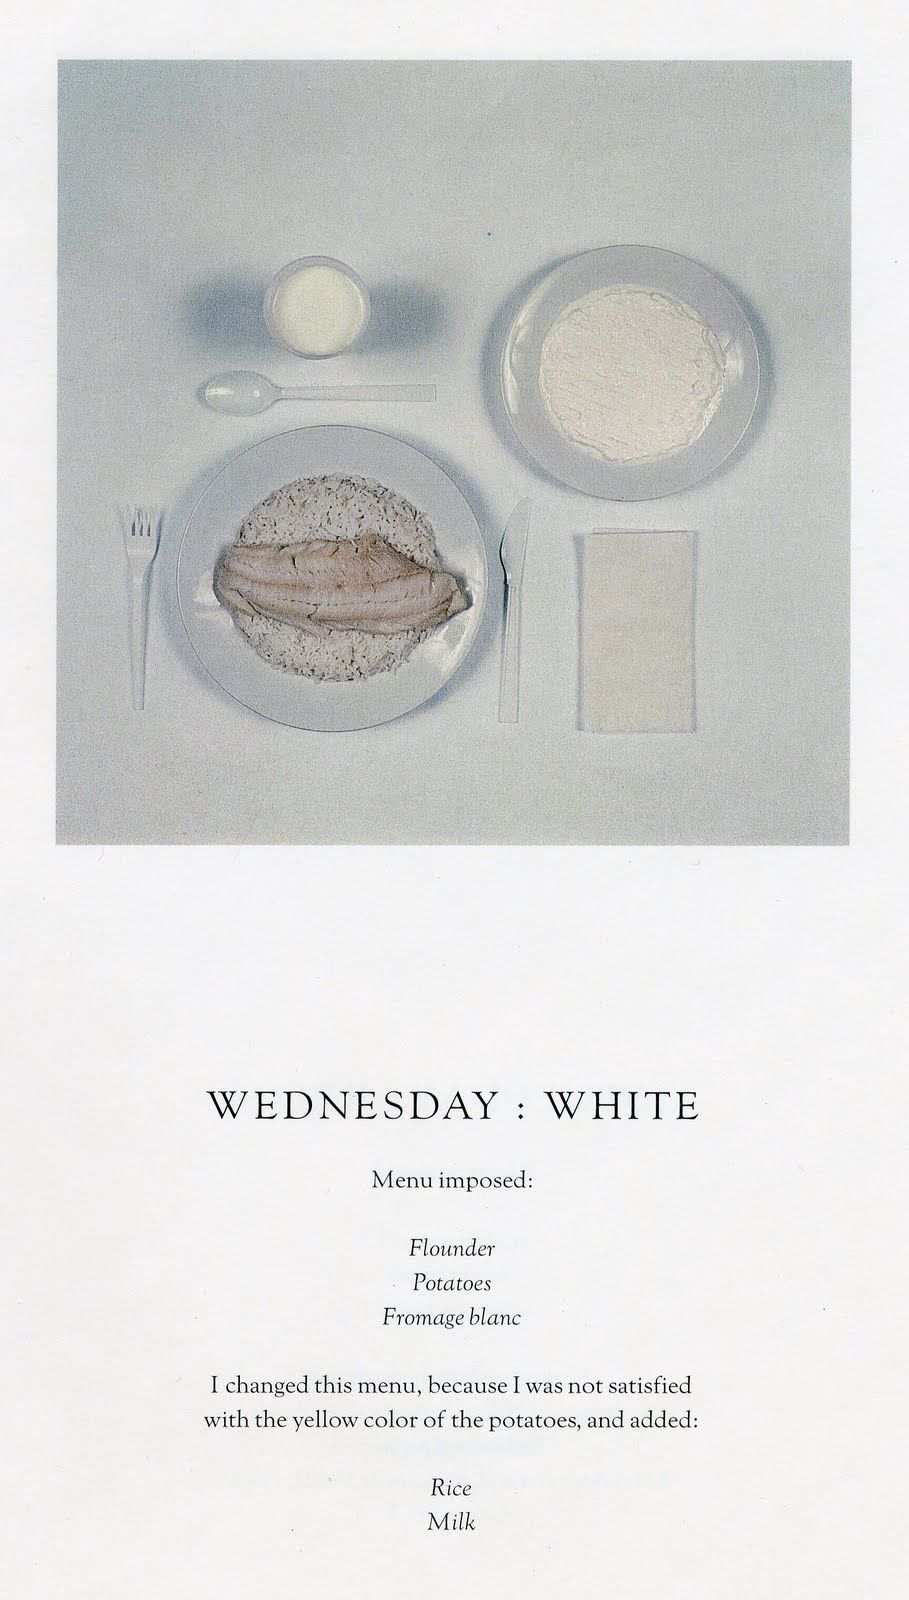 "Wednesday" by Sophie Calle. From the series The Chromatic Diet